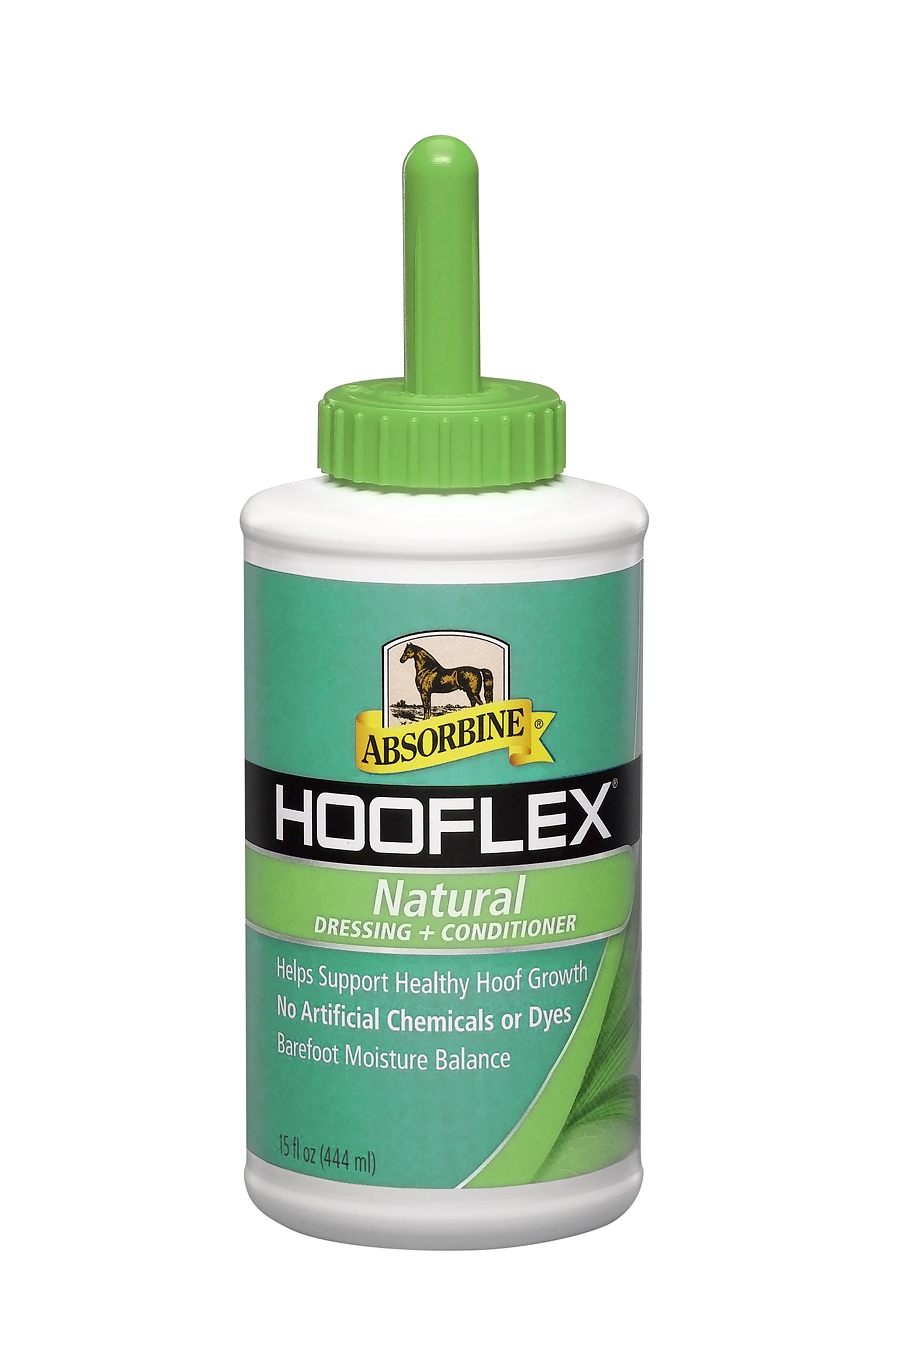 Absorbine Hooflex Natural Dressing and Conditioner 15 oz.